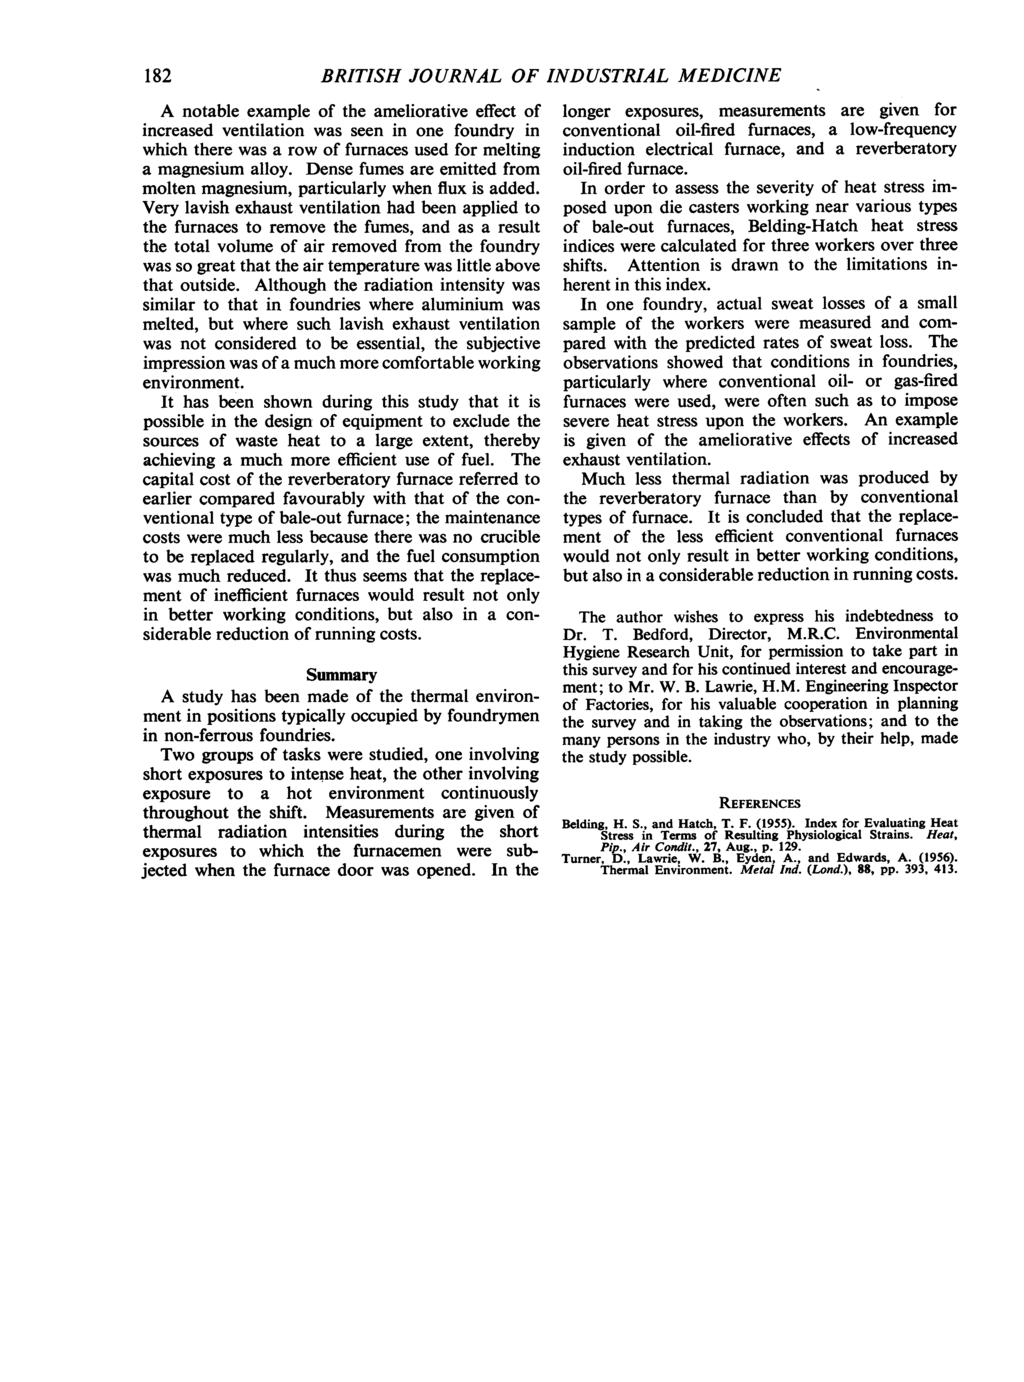 182 BRITISH JOURNAL OF INDUSTRIAL MEDICINE A notable example of the ameliorative effect of increased ventilation was seen in one foundry in which there was a row of furnaces used for melting a